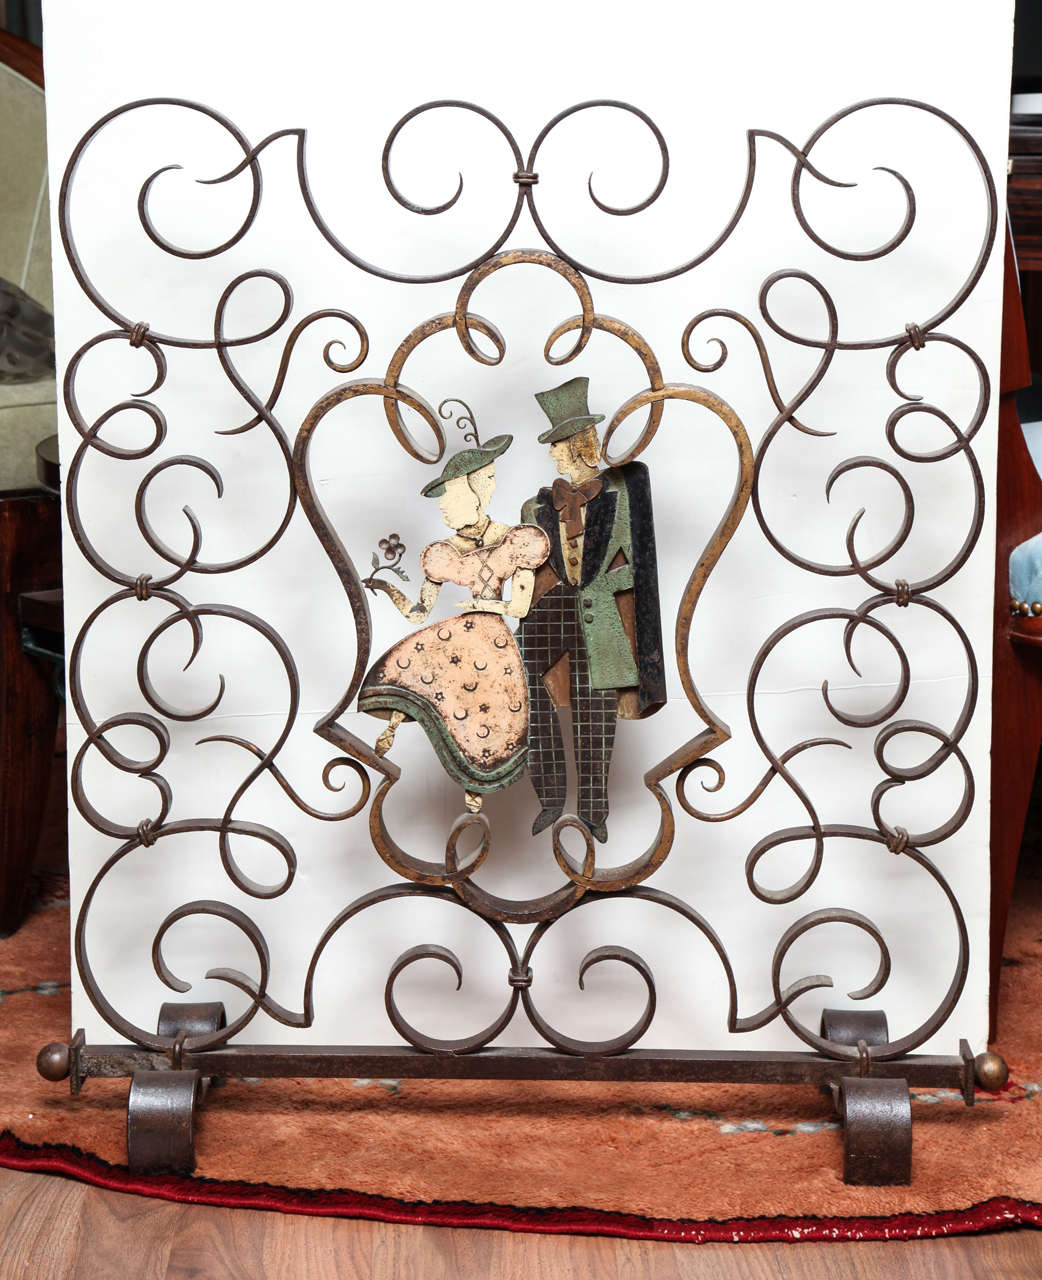 Art Deco figural fire screen in patinated and wrought iron with a motif of volutes and polychrome couple in the central medallion, French, 1930s. Measures: H 32.1 in (81.5 cm), L 29.5 in (75 cm).